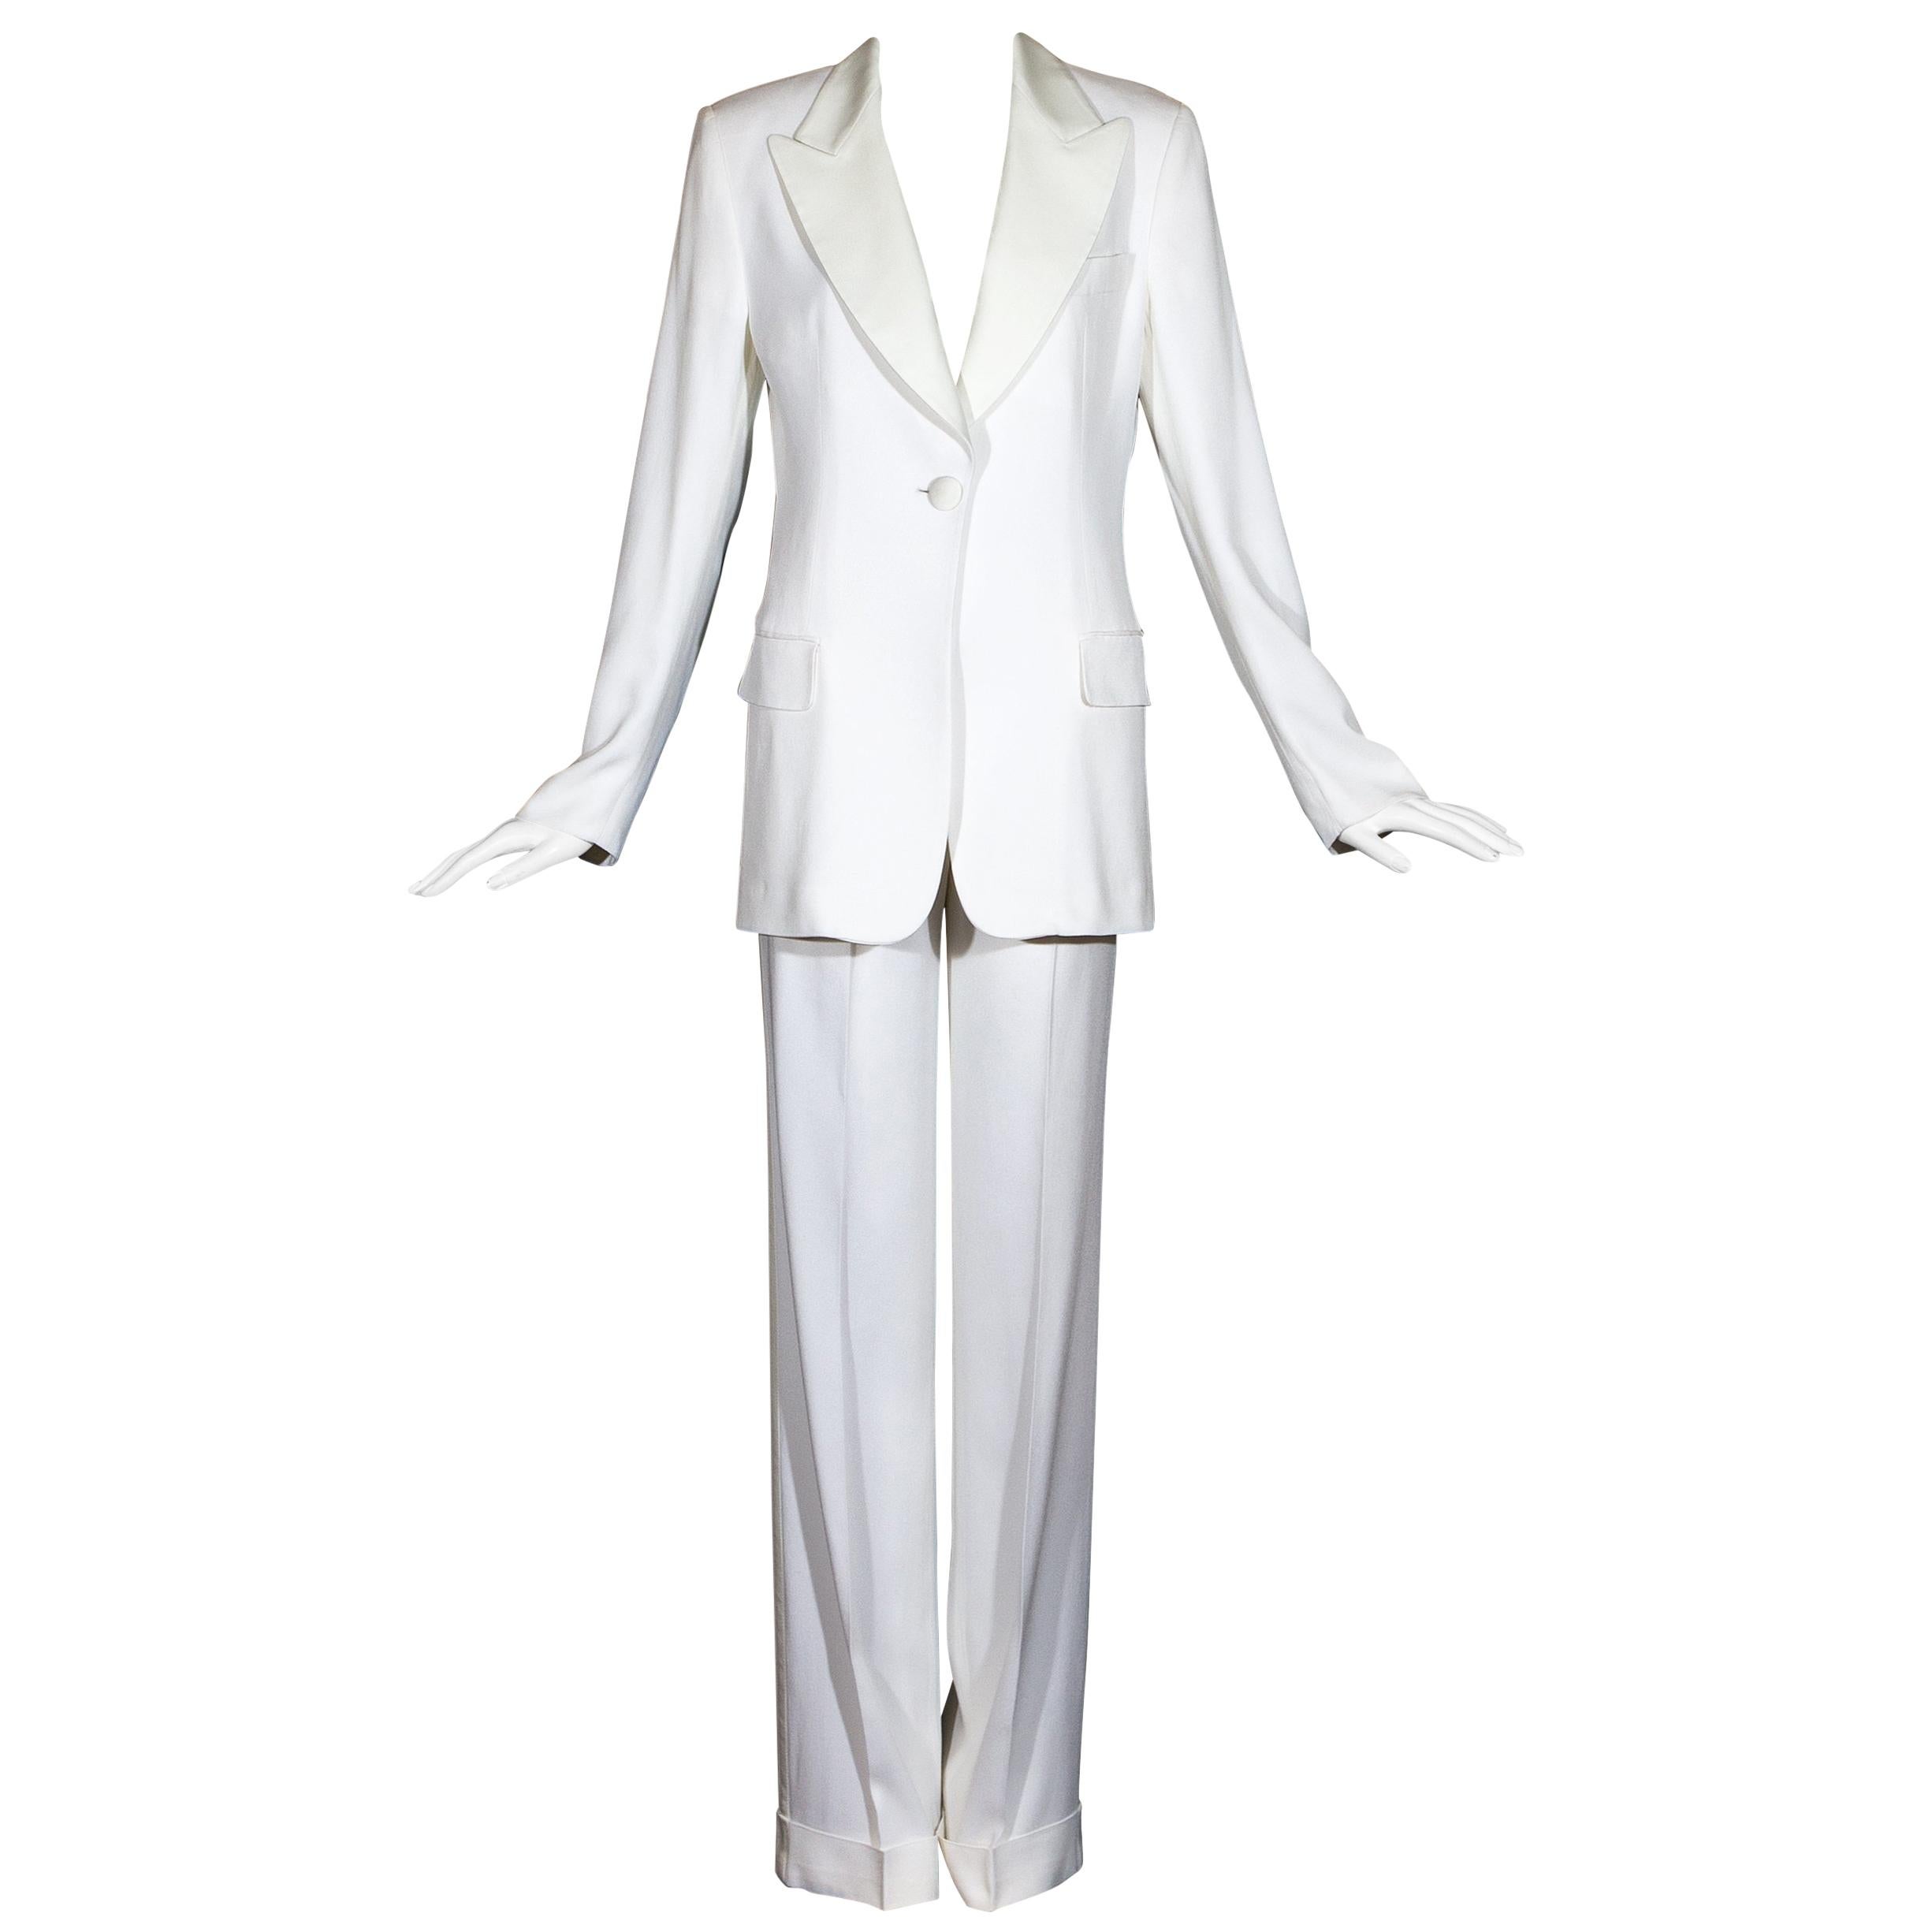 Dolce & Gabbana white crepe and satin Bianca Jagger pant suit, ss 1995 For Sale